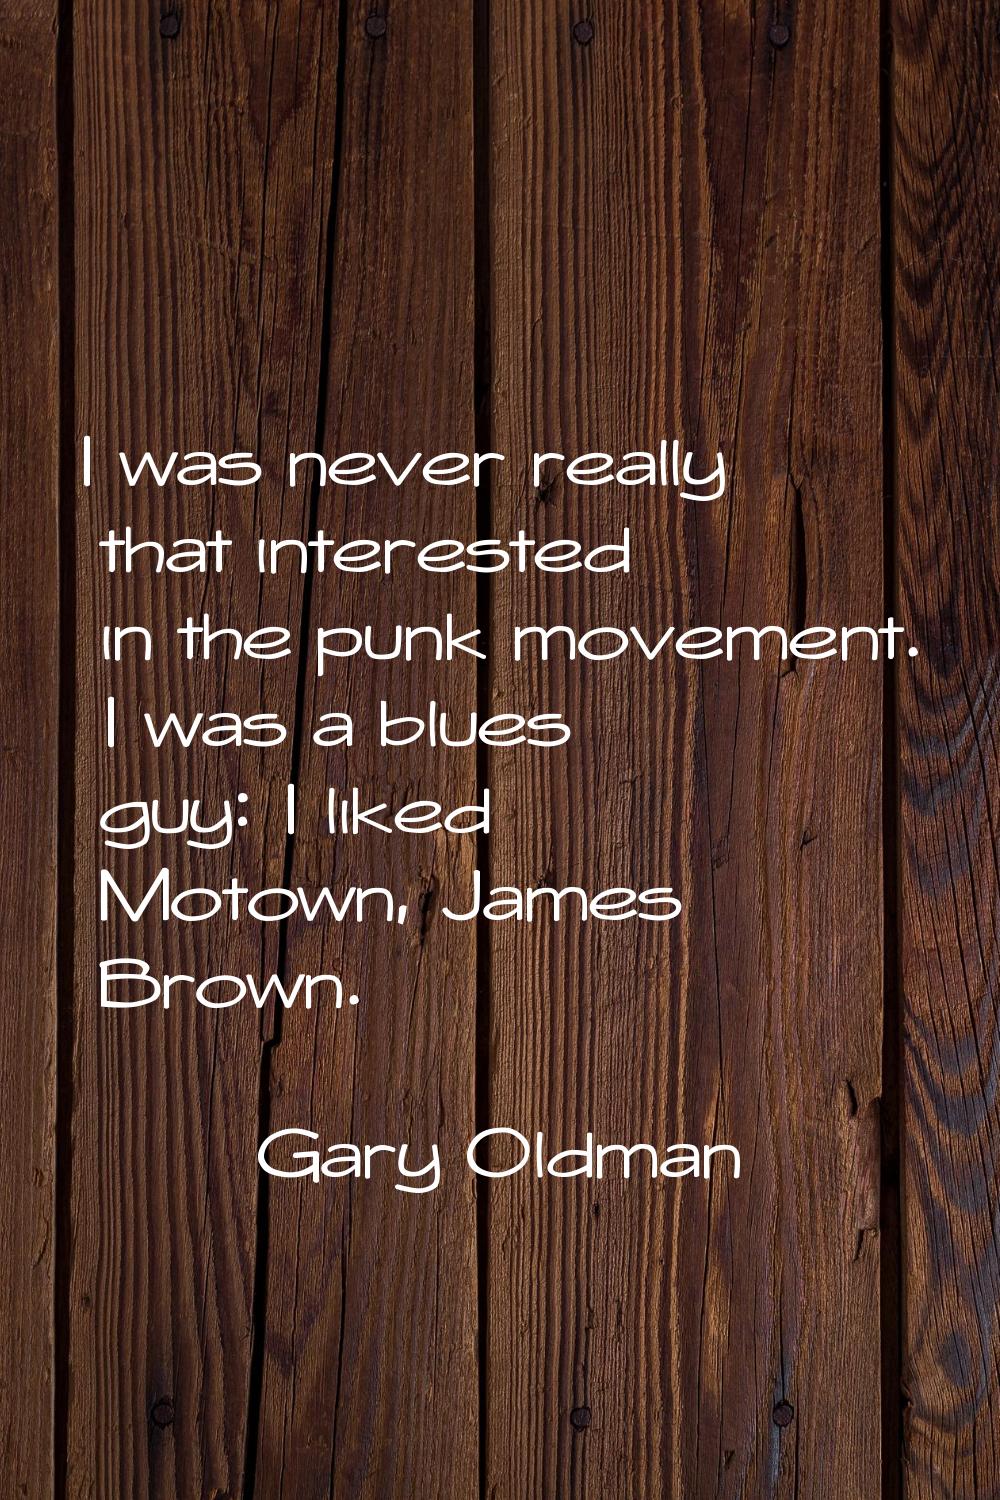 I was never really that interested in the punk movement. I was a blues guy: I liked Motown, James B